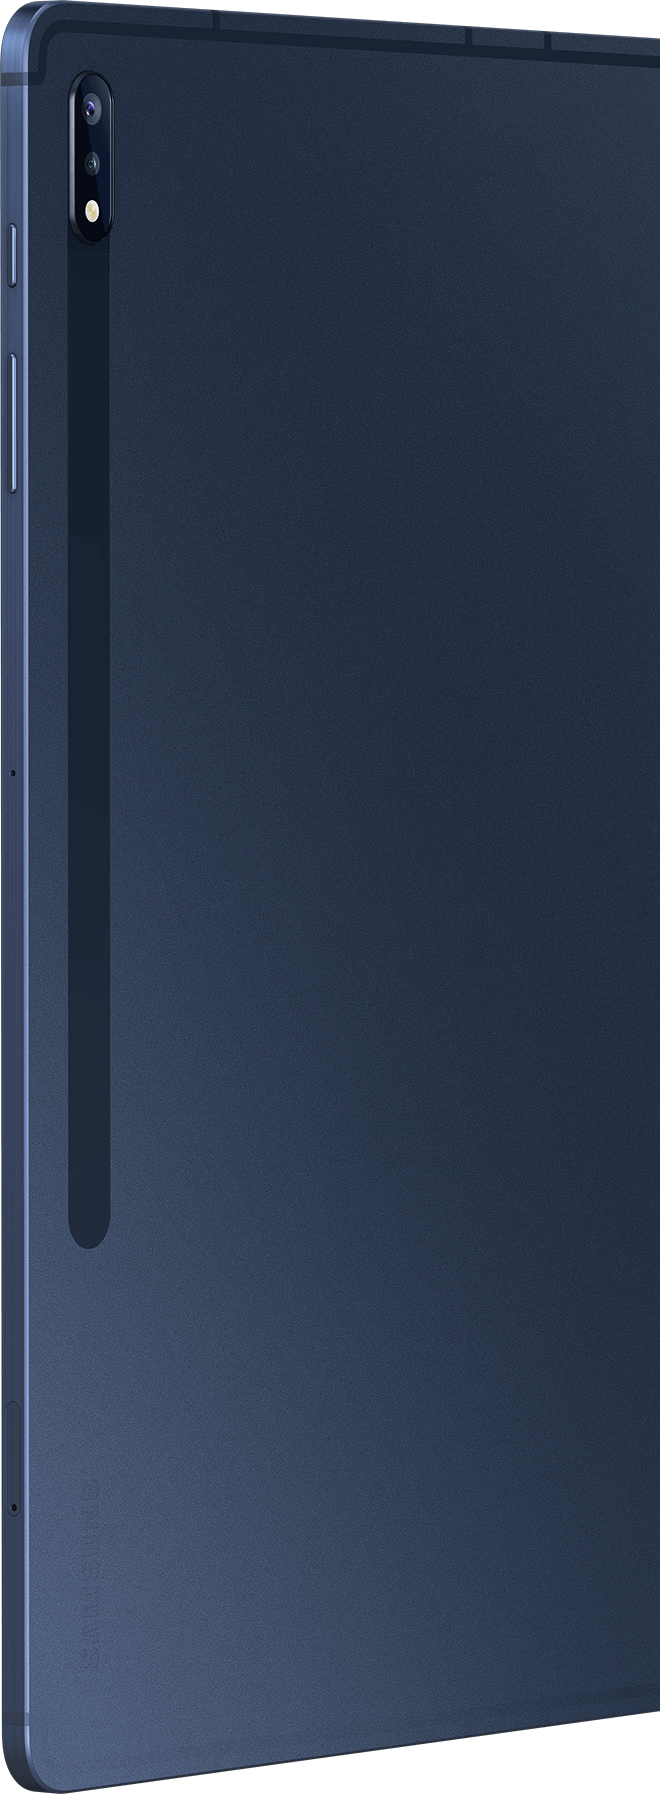 Rear view of Galaxy Tab S7+ in Mystic Navy